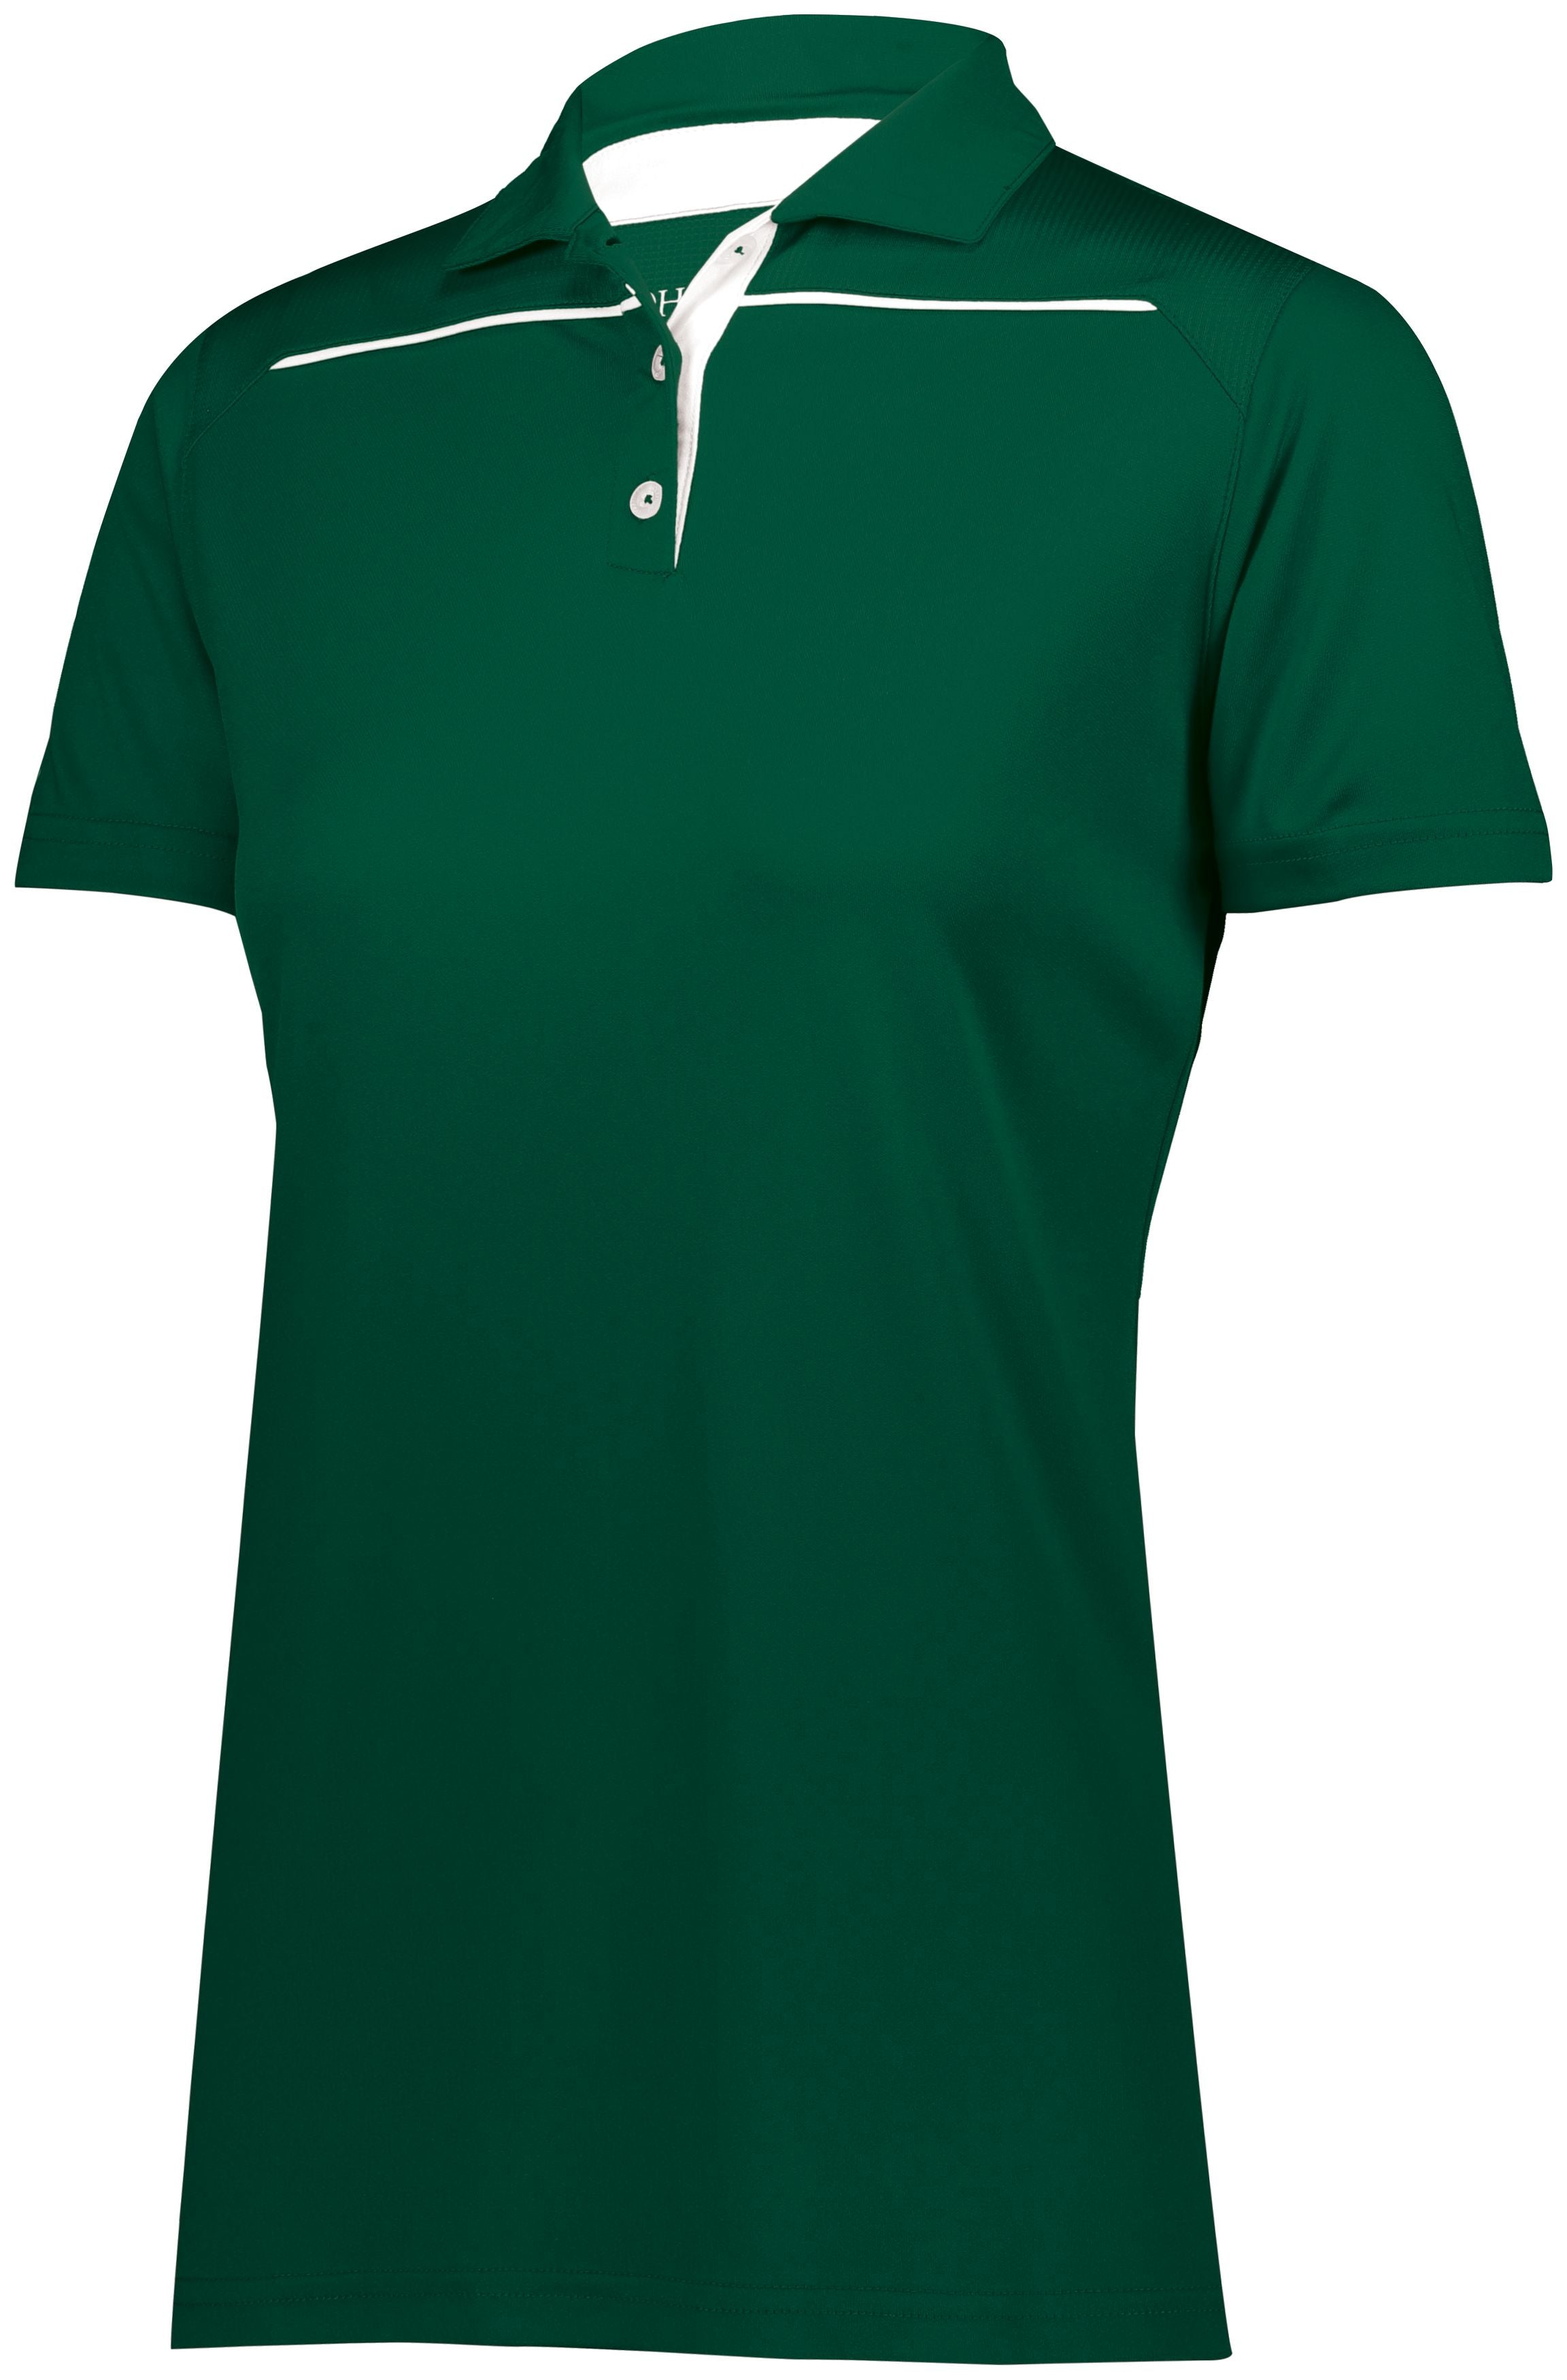 Holloway Ladies Defer Polo in Forest/White  -Part of the Ladies, Ladies-Polo, Polos, Holloway, Shirts product lines at KanaleyCreations.com